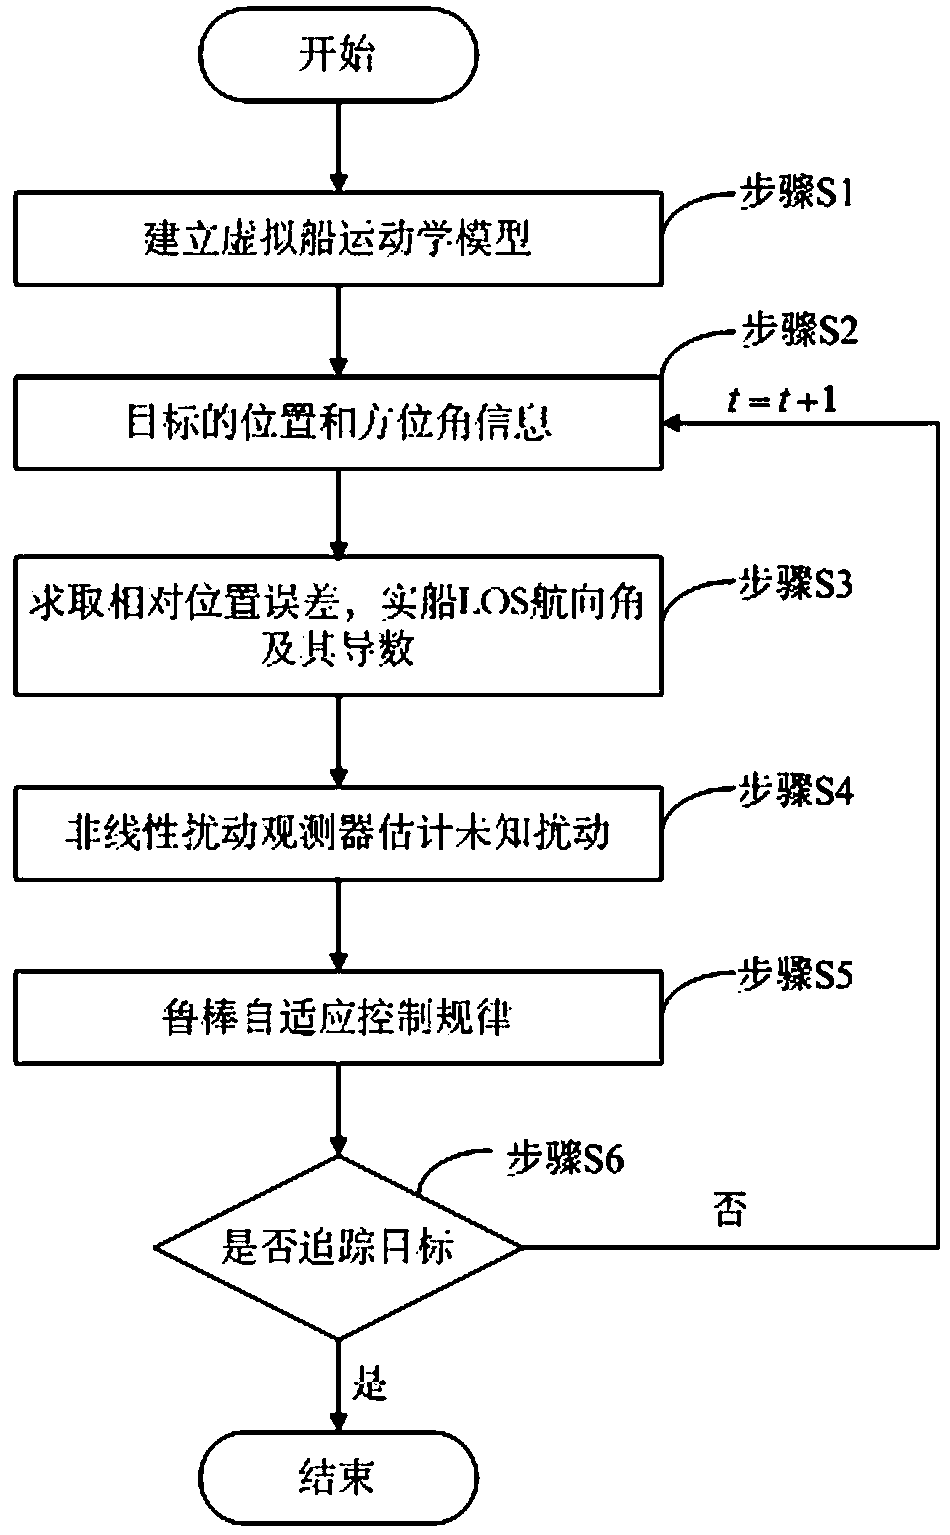 Disturbance observer-based underactuated ship path following control method